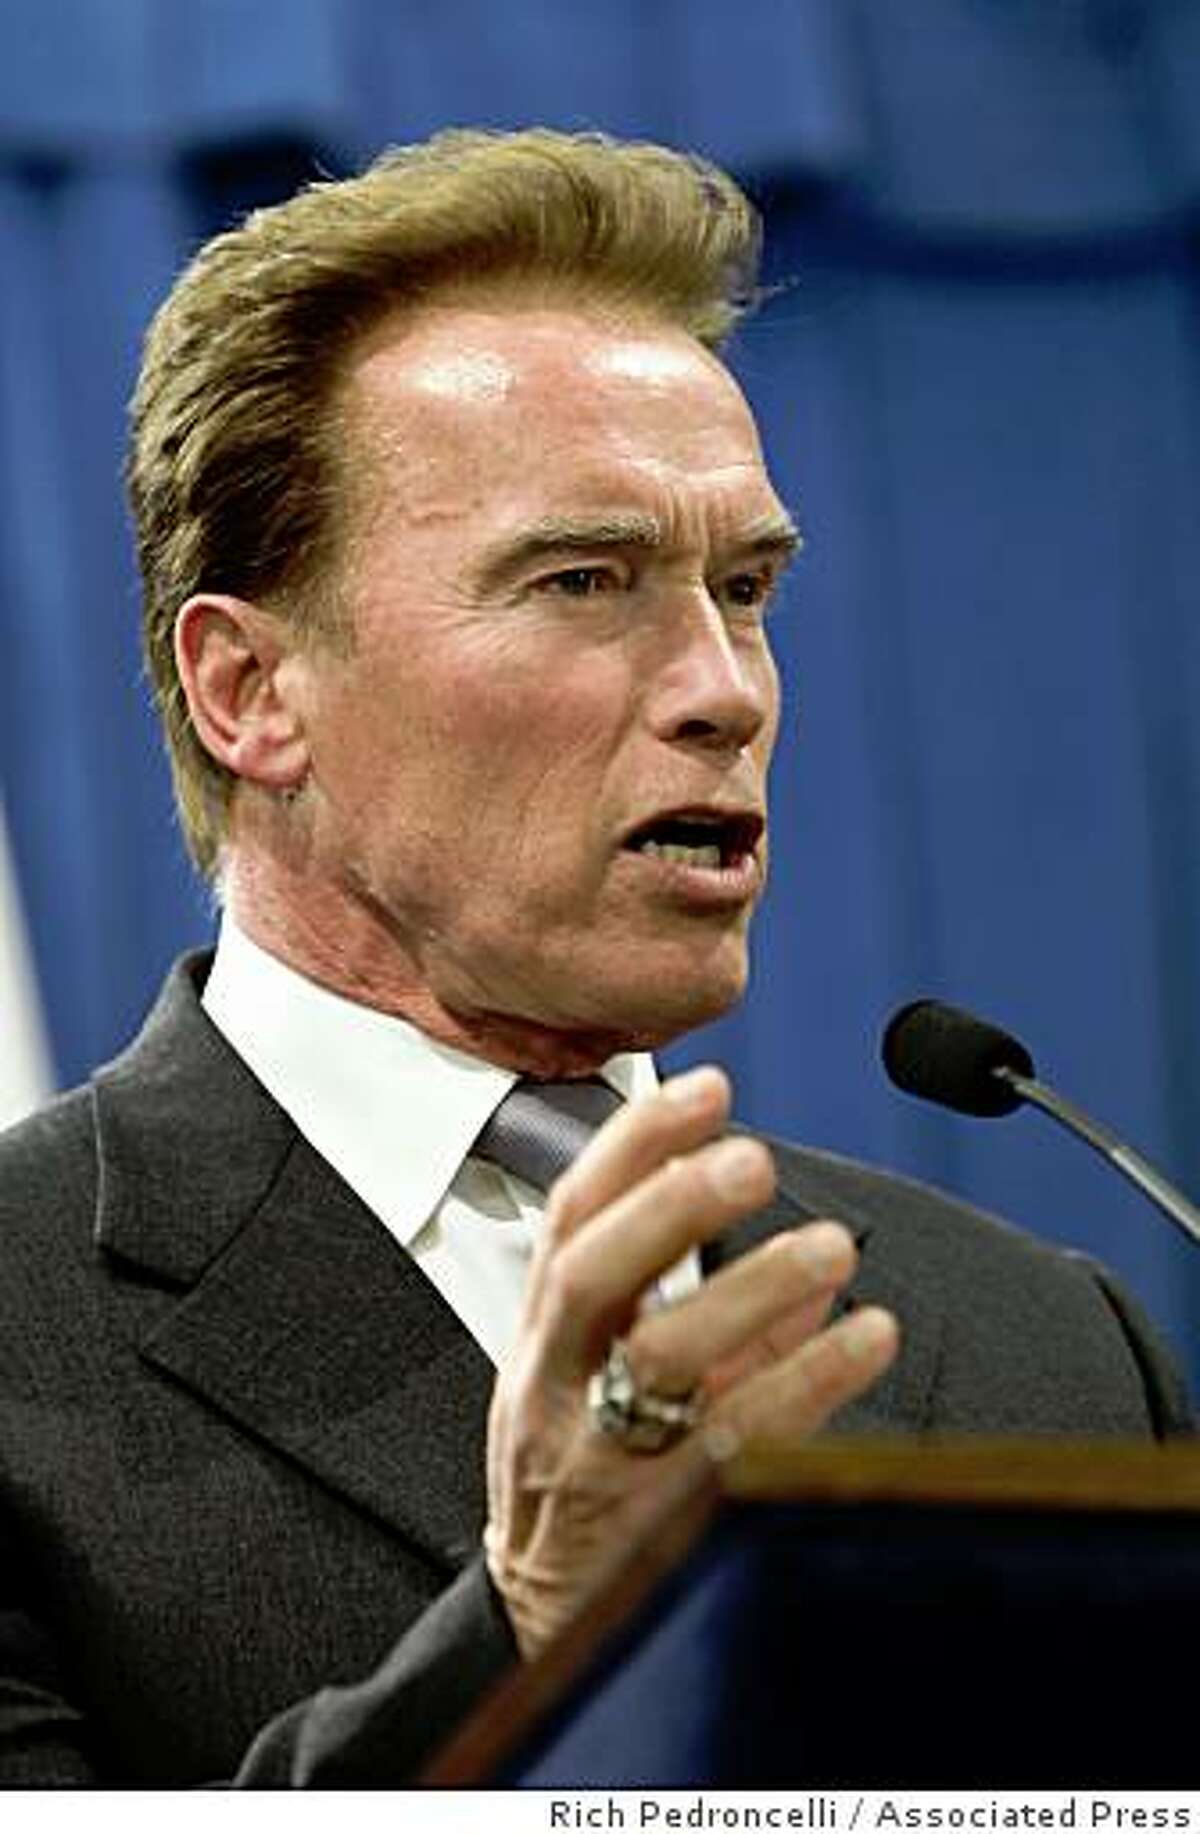 Gov. Arnold Schwarzenegger said he will restart stalled state budget talks in hopes of getting an agreement to deal with a $42 billion deficit during a news conference at the Capitol in Sacramento, Calif., Wednesday, Jan. 7, 2009.